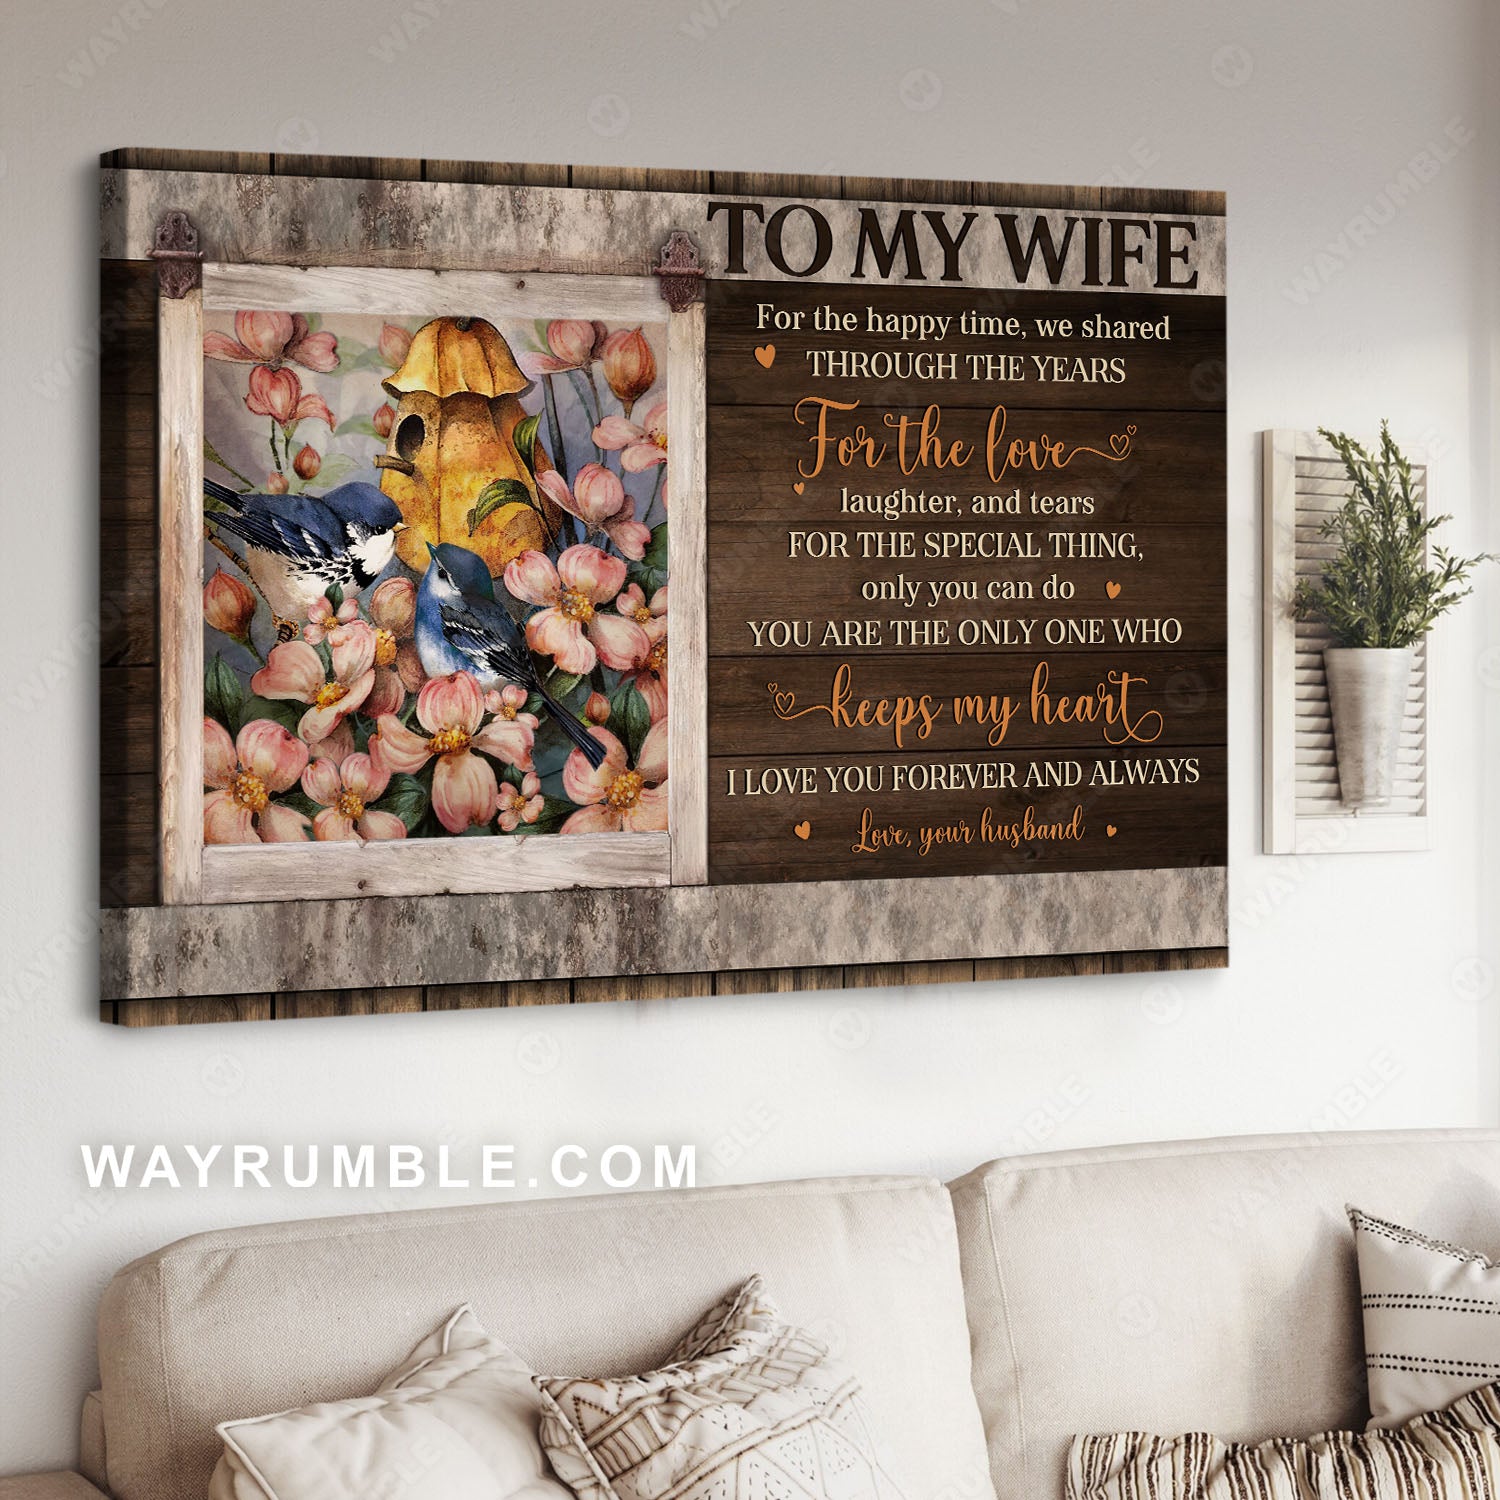 To my wife, Blue jay painting, Vintage flower, I love you forever and always - Couple Landscape Canvas Prints, Wall Art